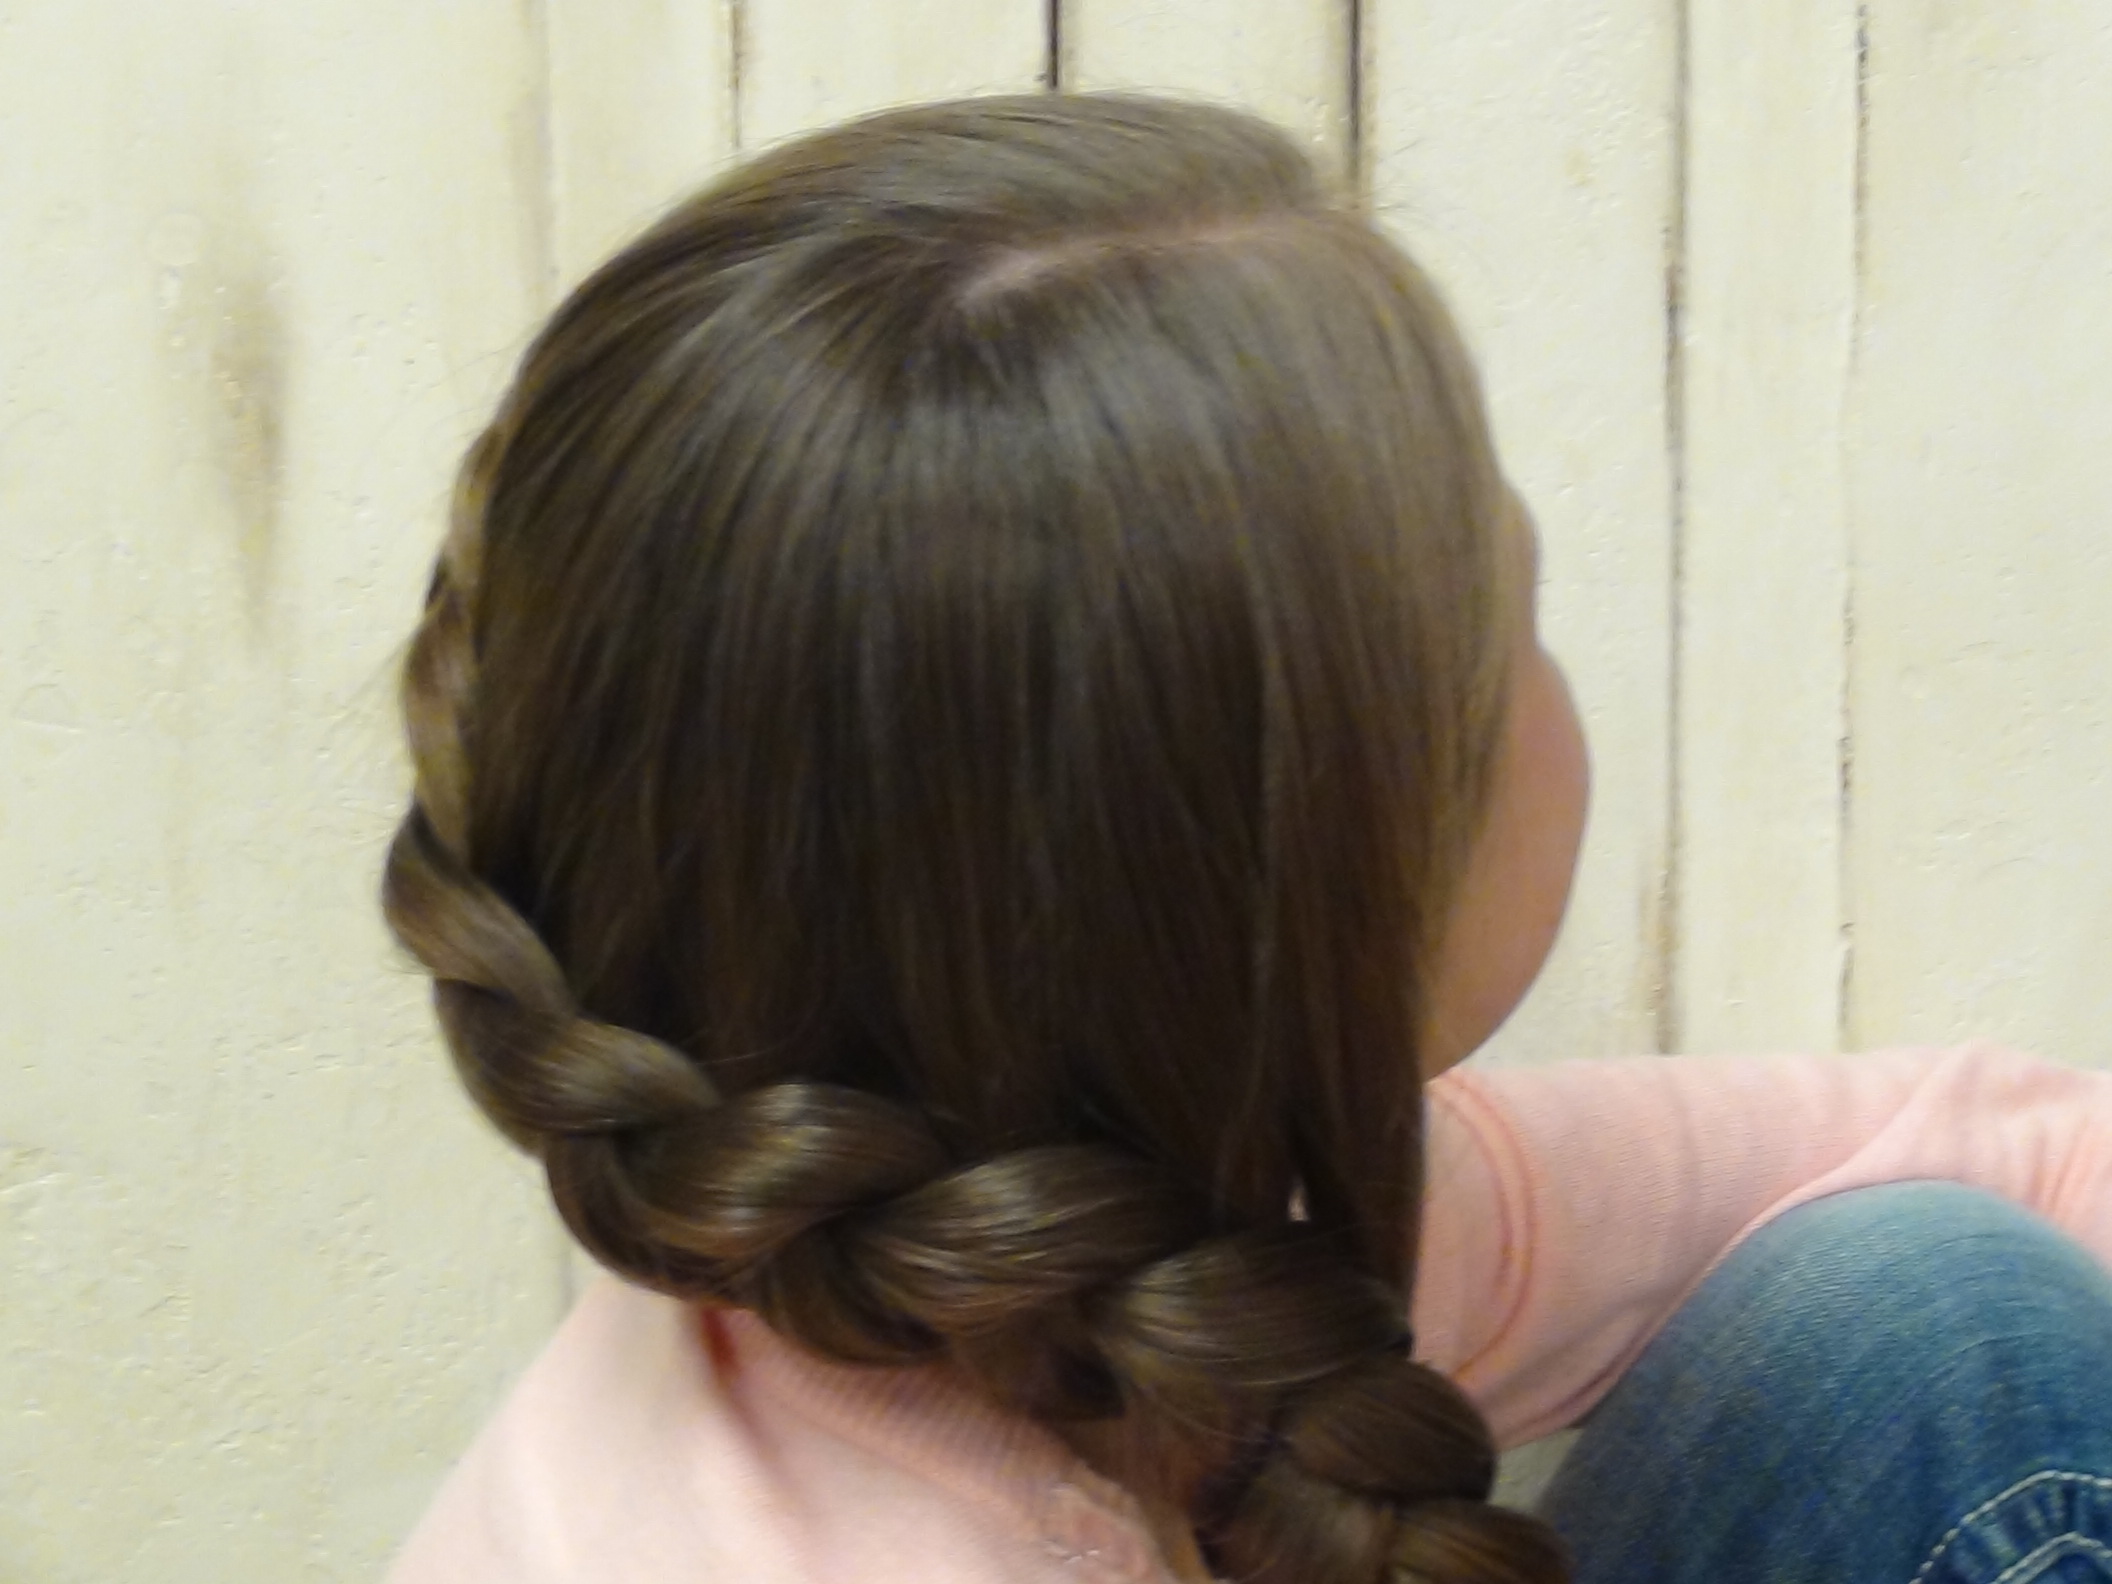 Katniss Everdeen Braid From The Hunger Game Movie | Boys and Girls ...